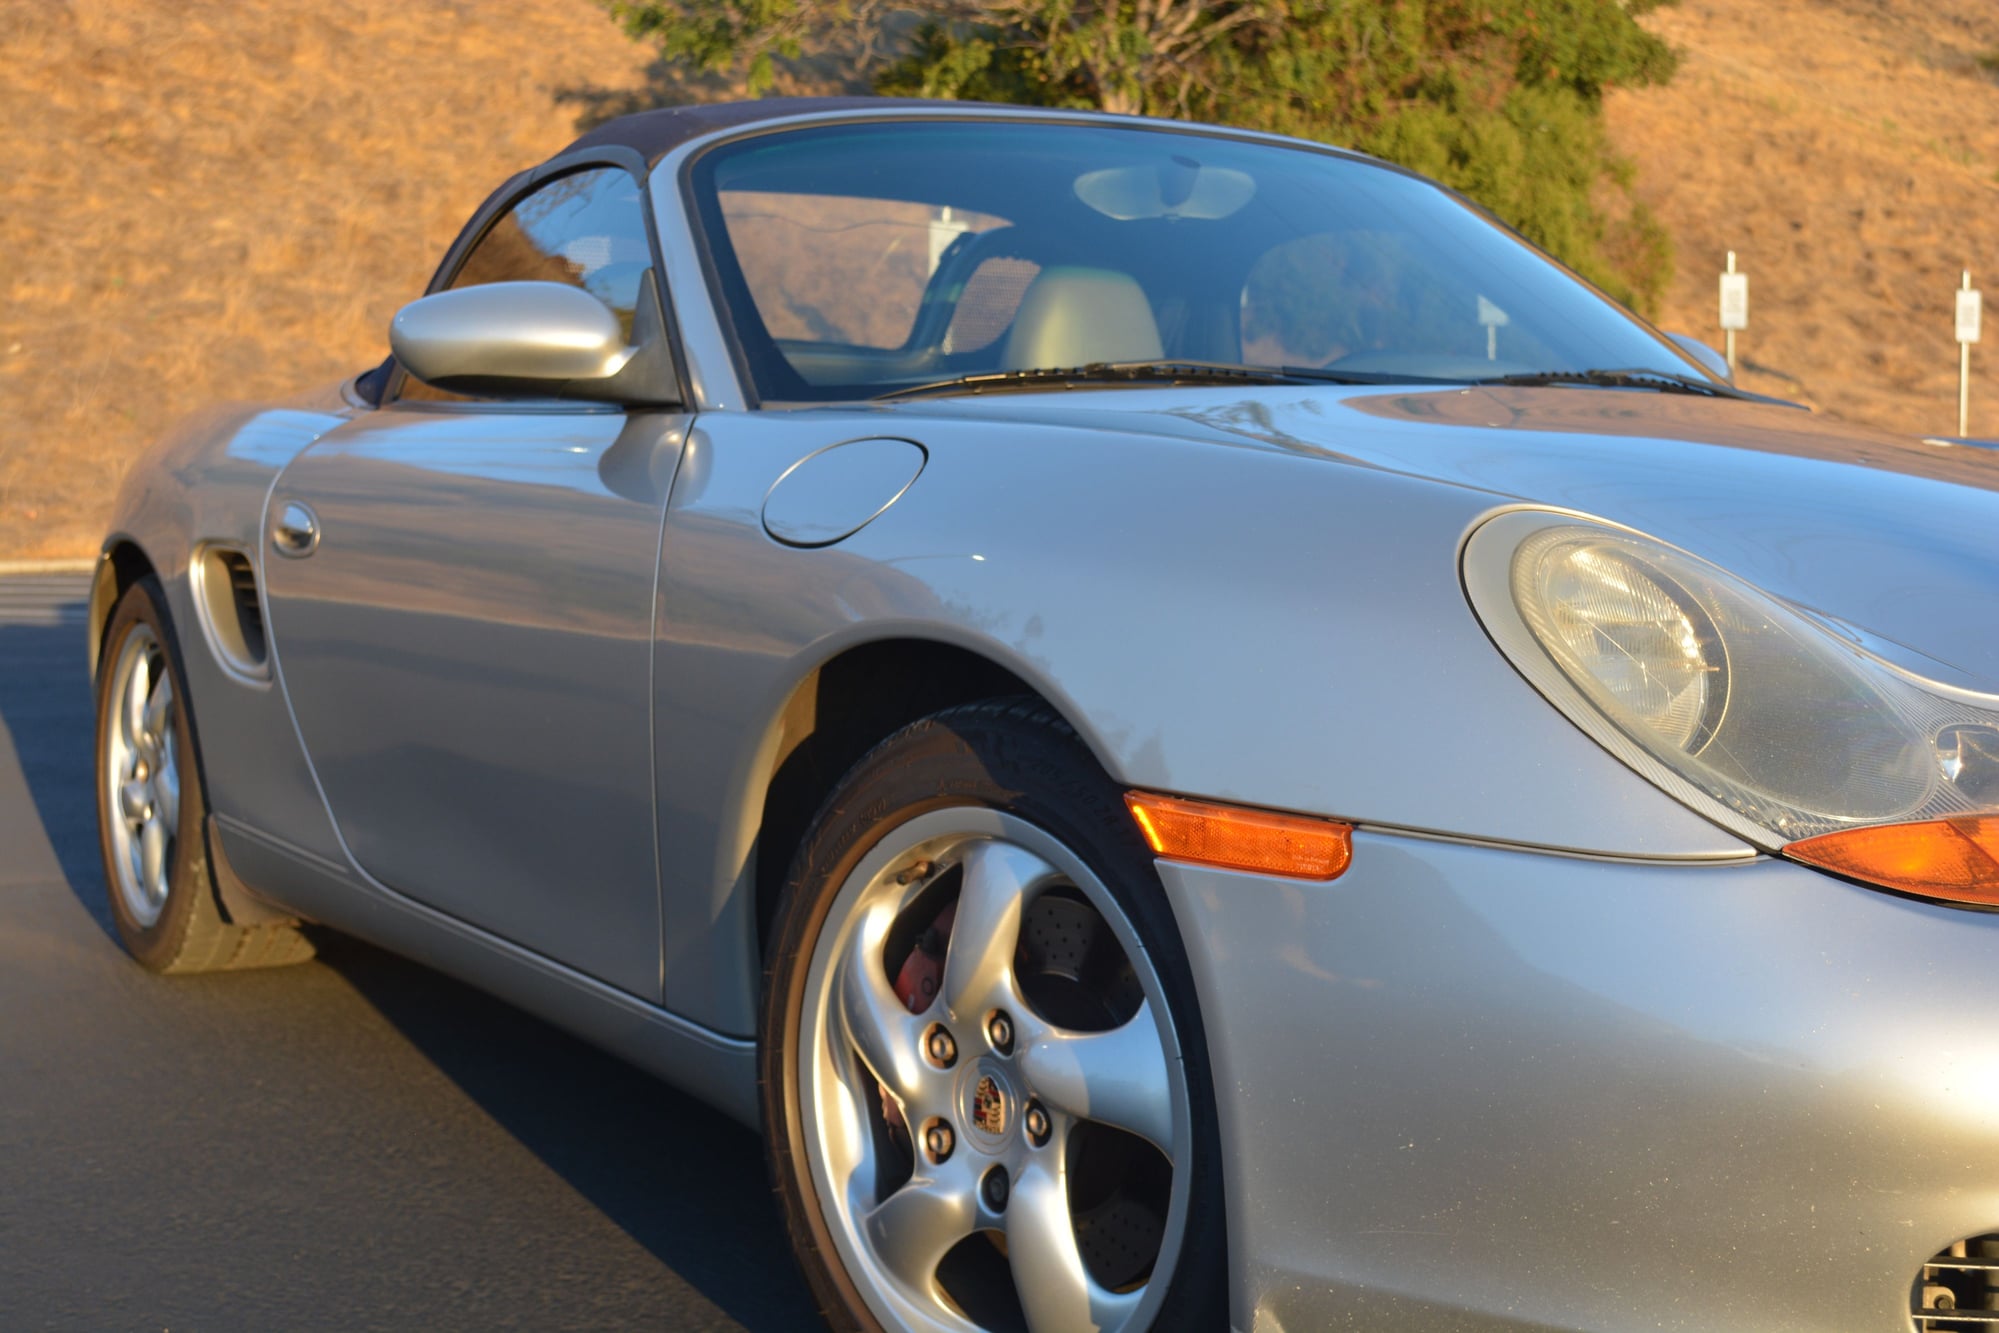 2002 Porsche Boxster - 2002 Boxster S - Used - VIN WP0CB298X2U663633 - 125,000 Miles - 6 cyl - 2WD - Manual - Convertible - Silver - Fremont, CA 94539, United States